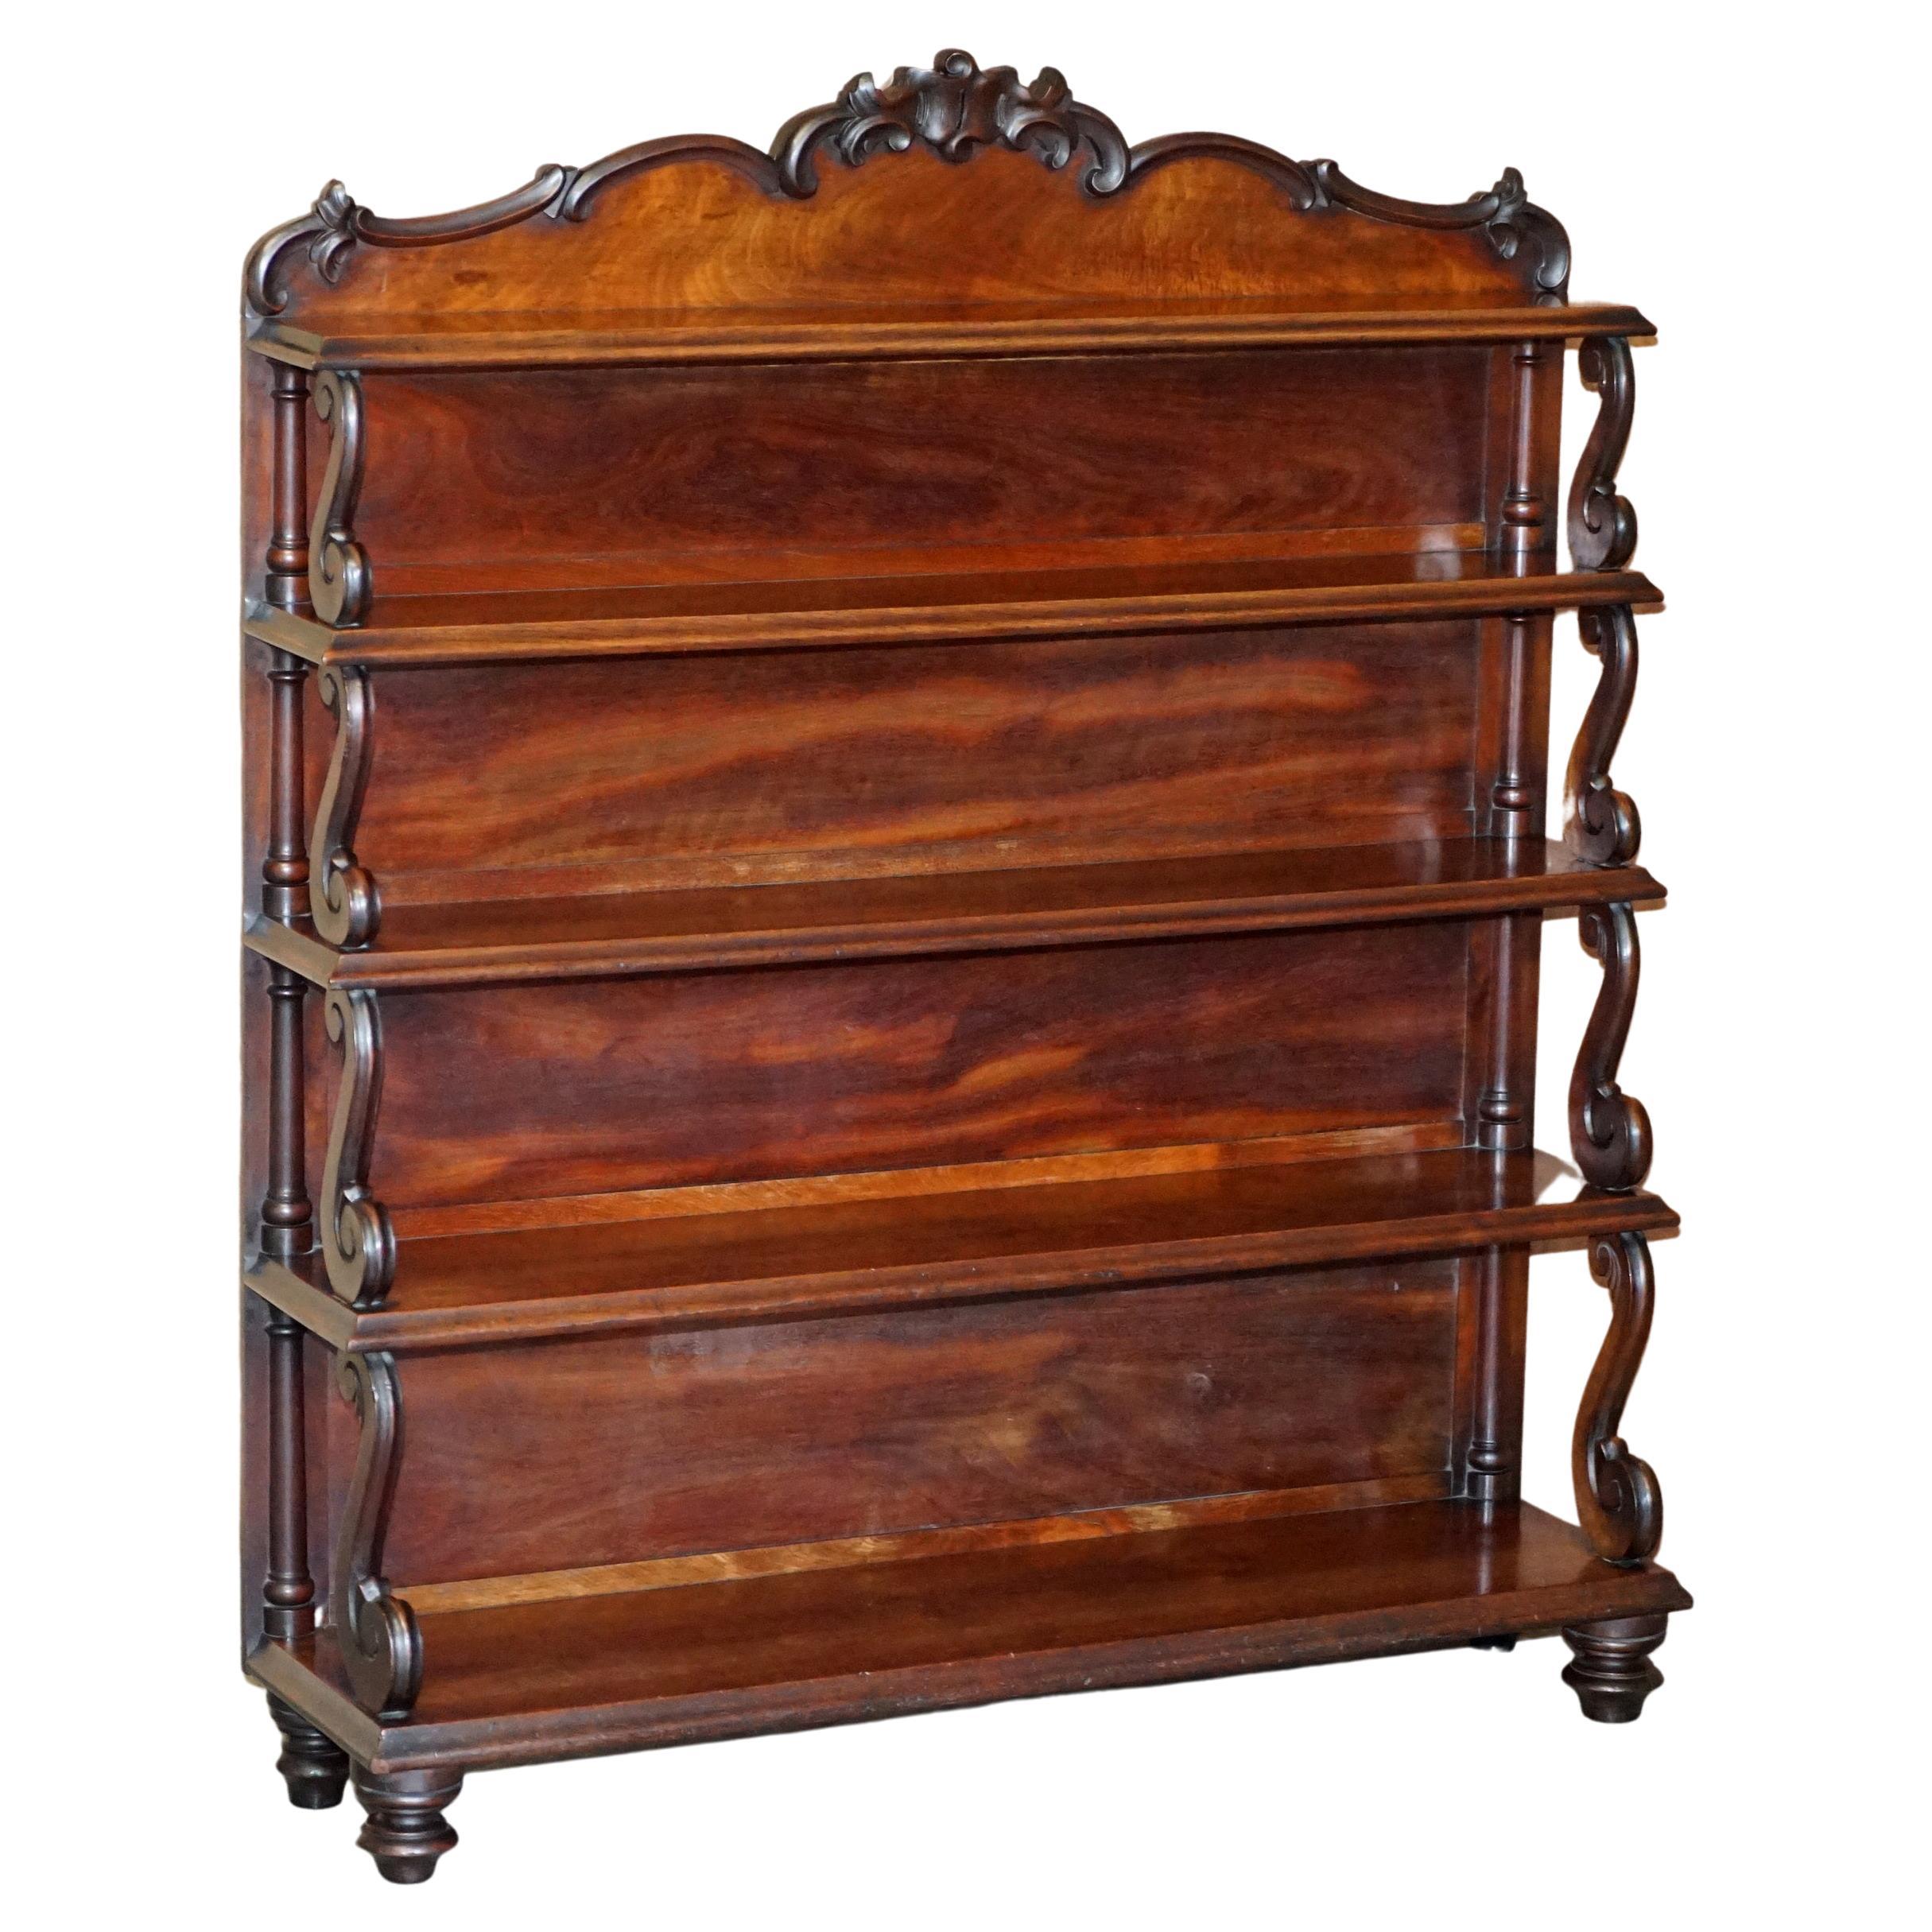 circa 1840 Antique Victorian Waterfall Open Library Bookcase in Flamed Hardwood